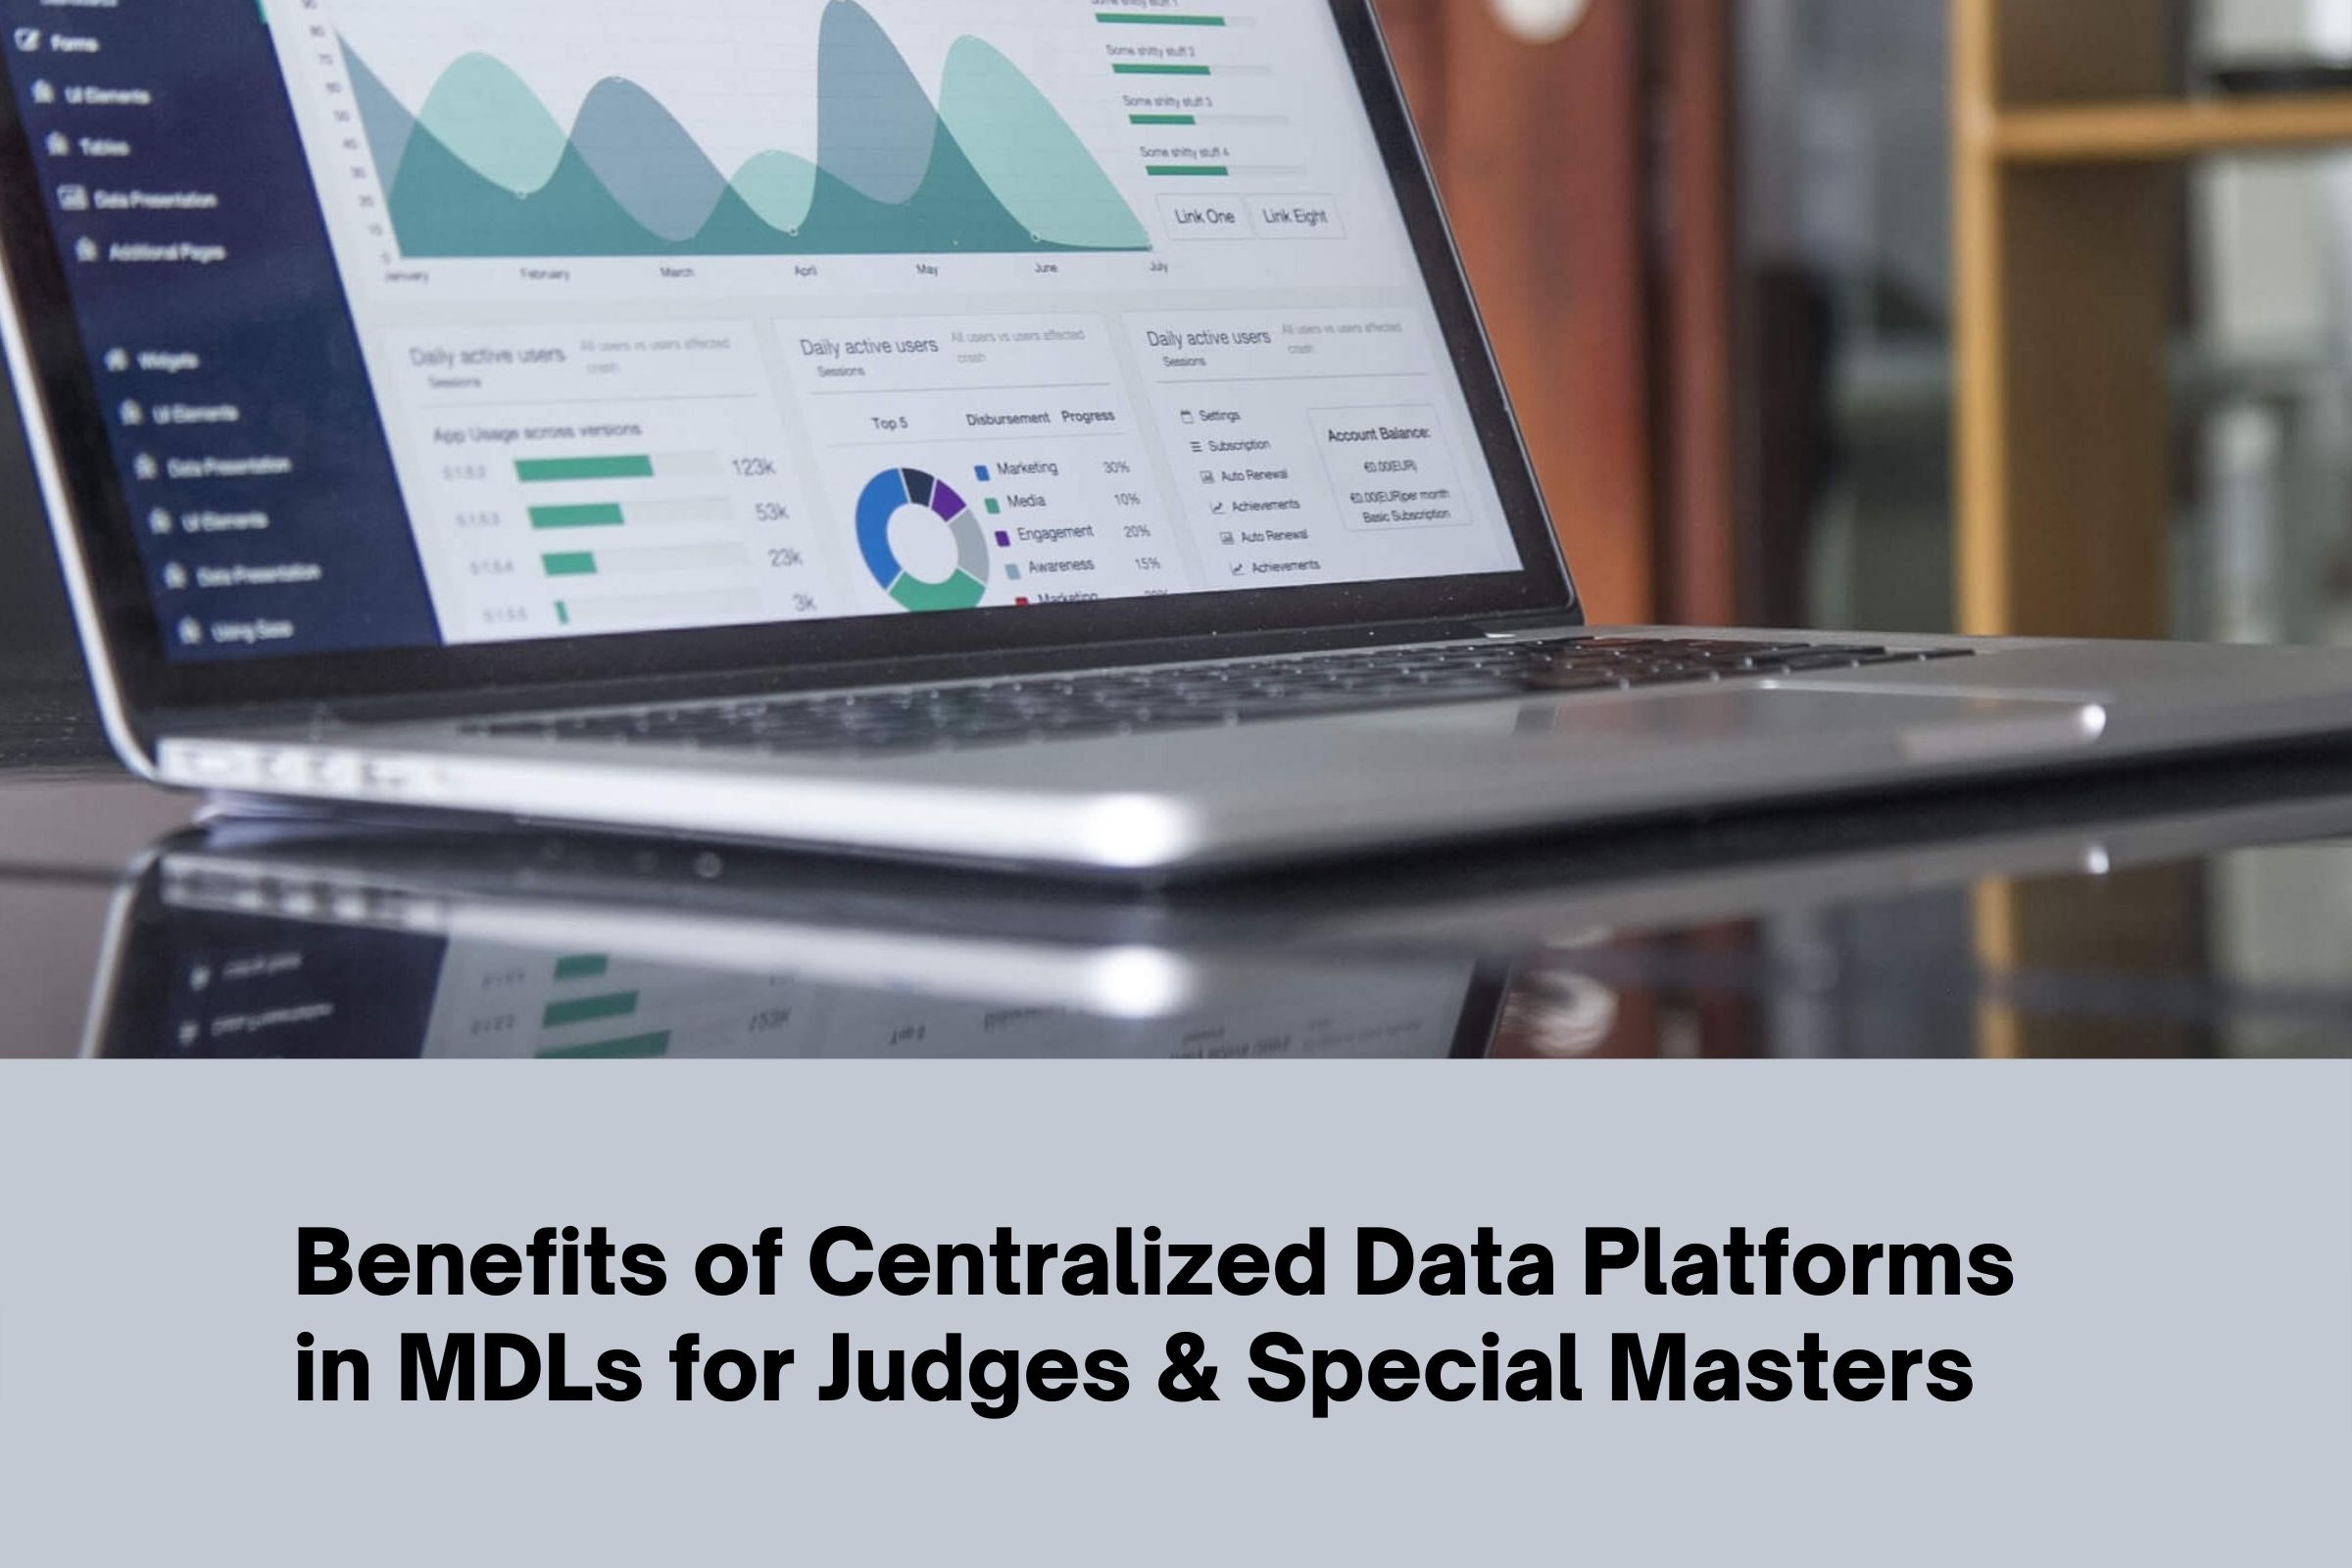 Benefits of Centralized Data Platforms in MDLs for Judges and Special Masters